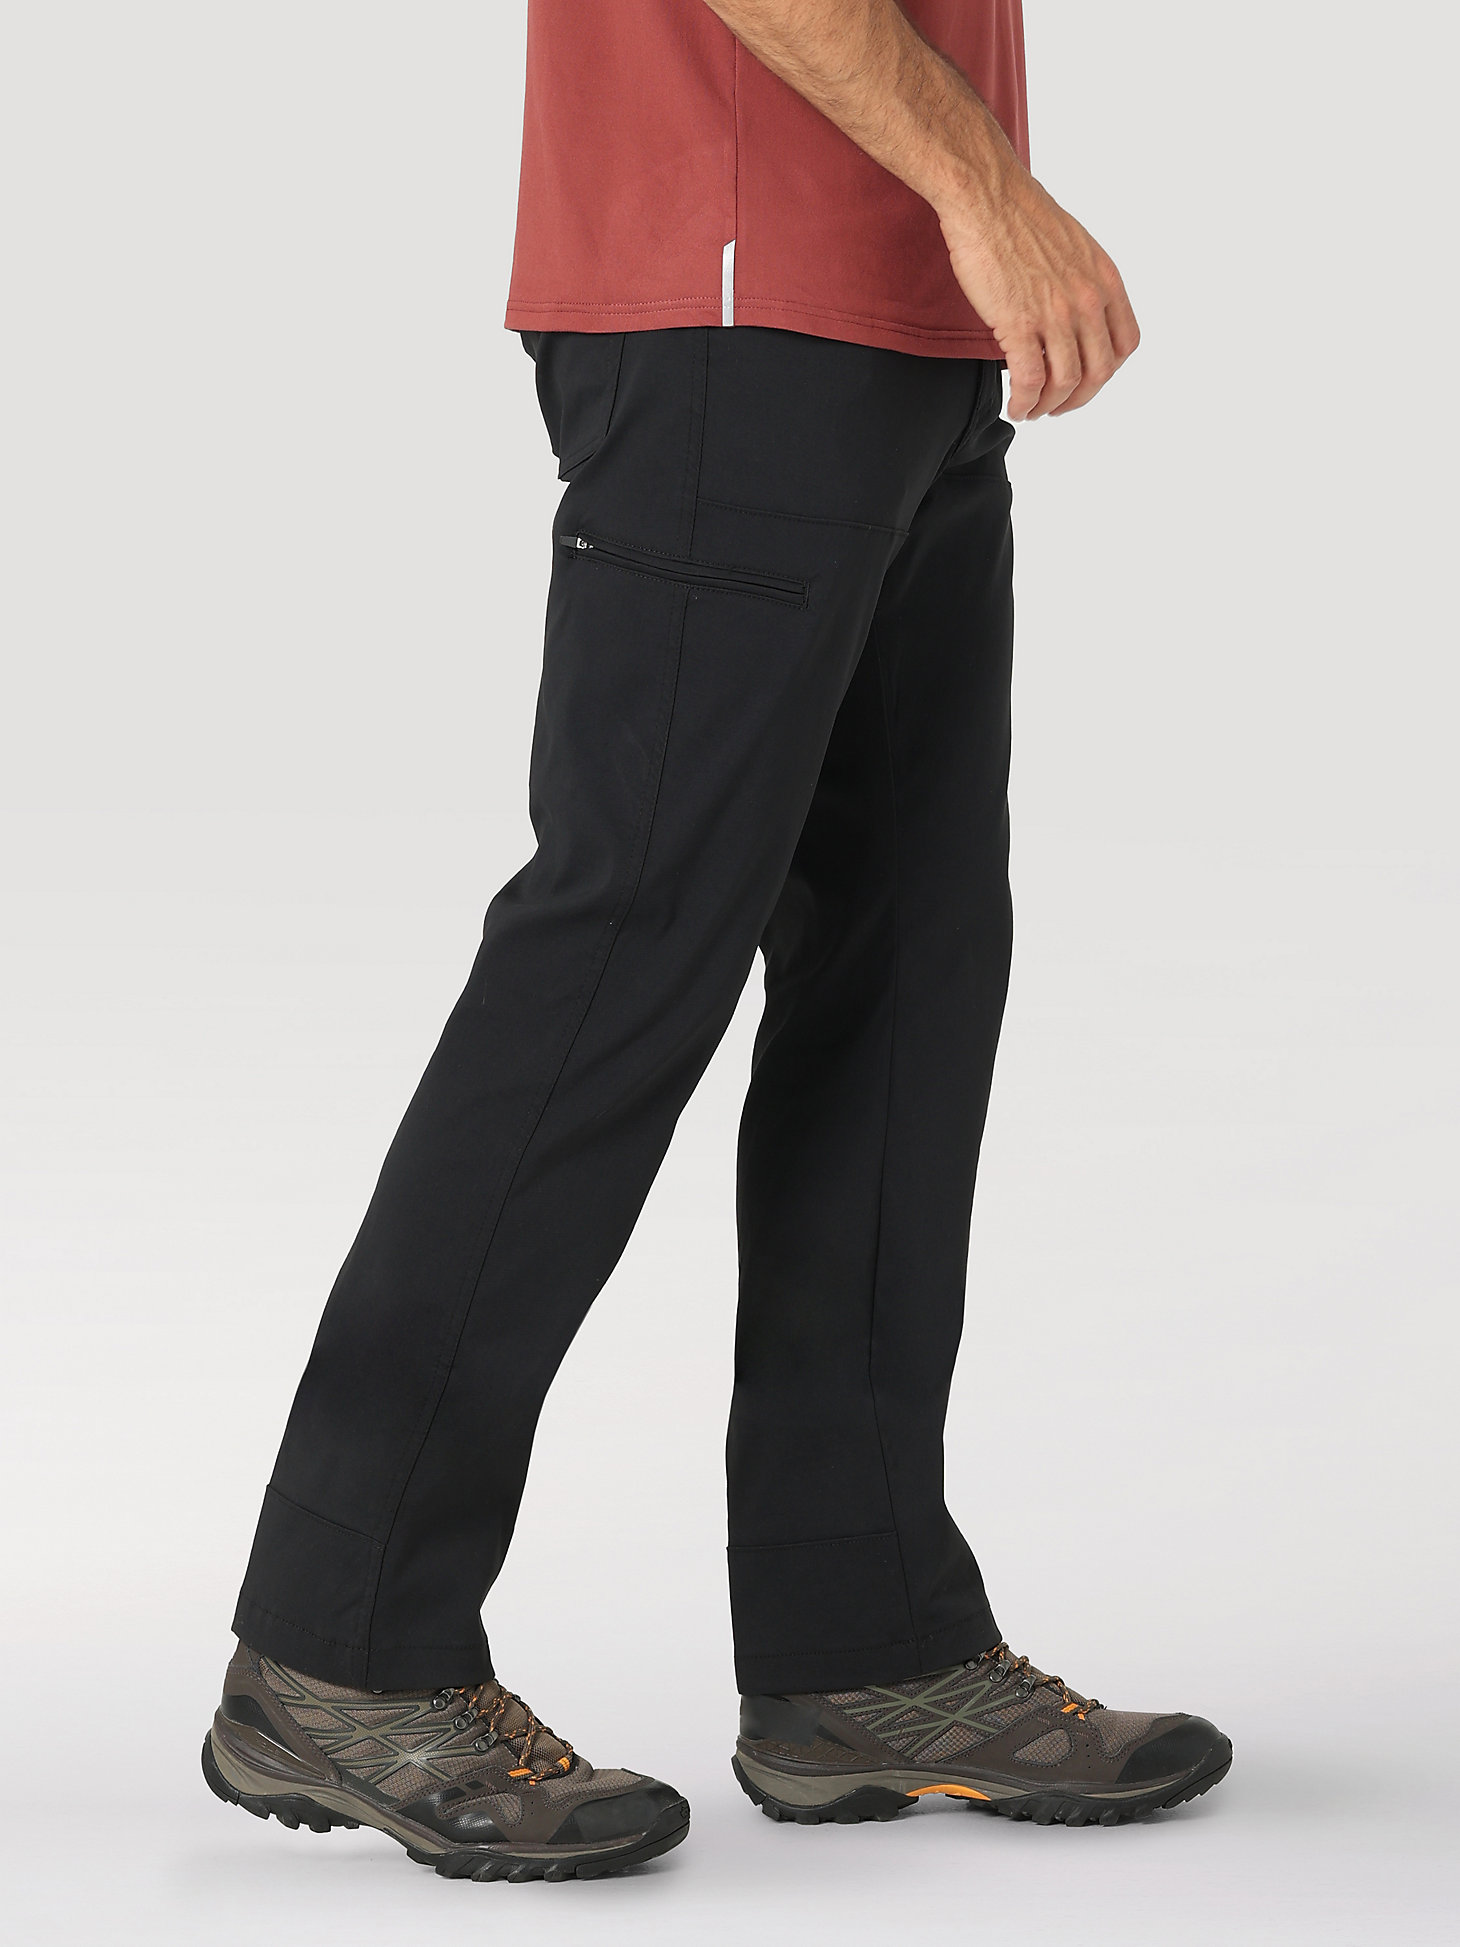 ATG by Wrangler™ Men's Synthetic Utility Pant in Caviar alternative view 8